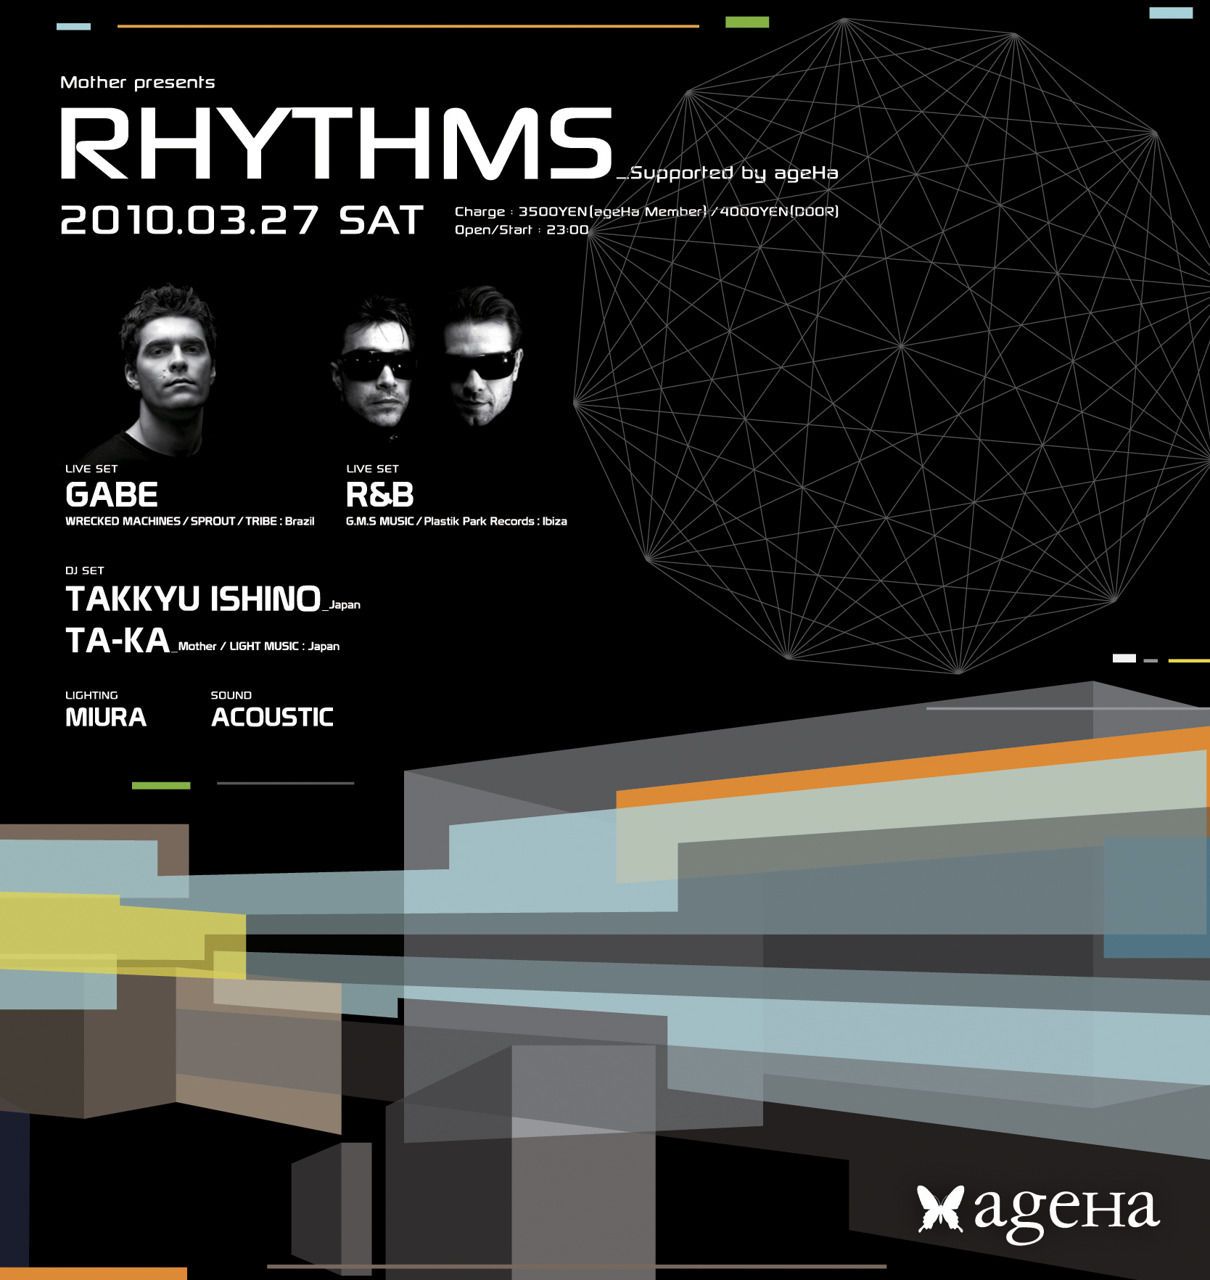 Mother presents「RHYTHMS」 supported by ageHa